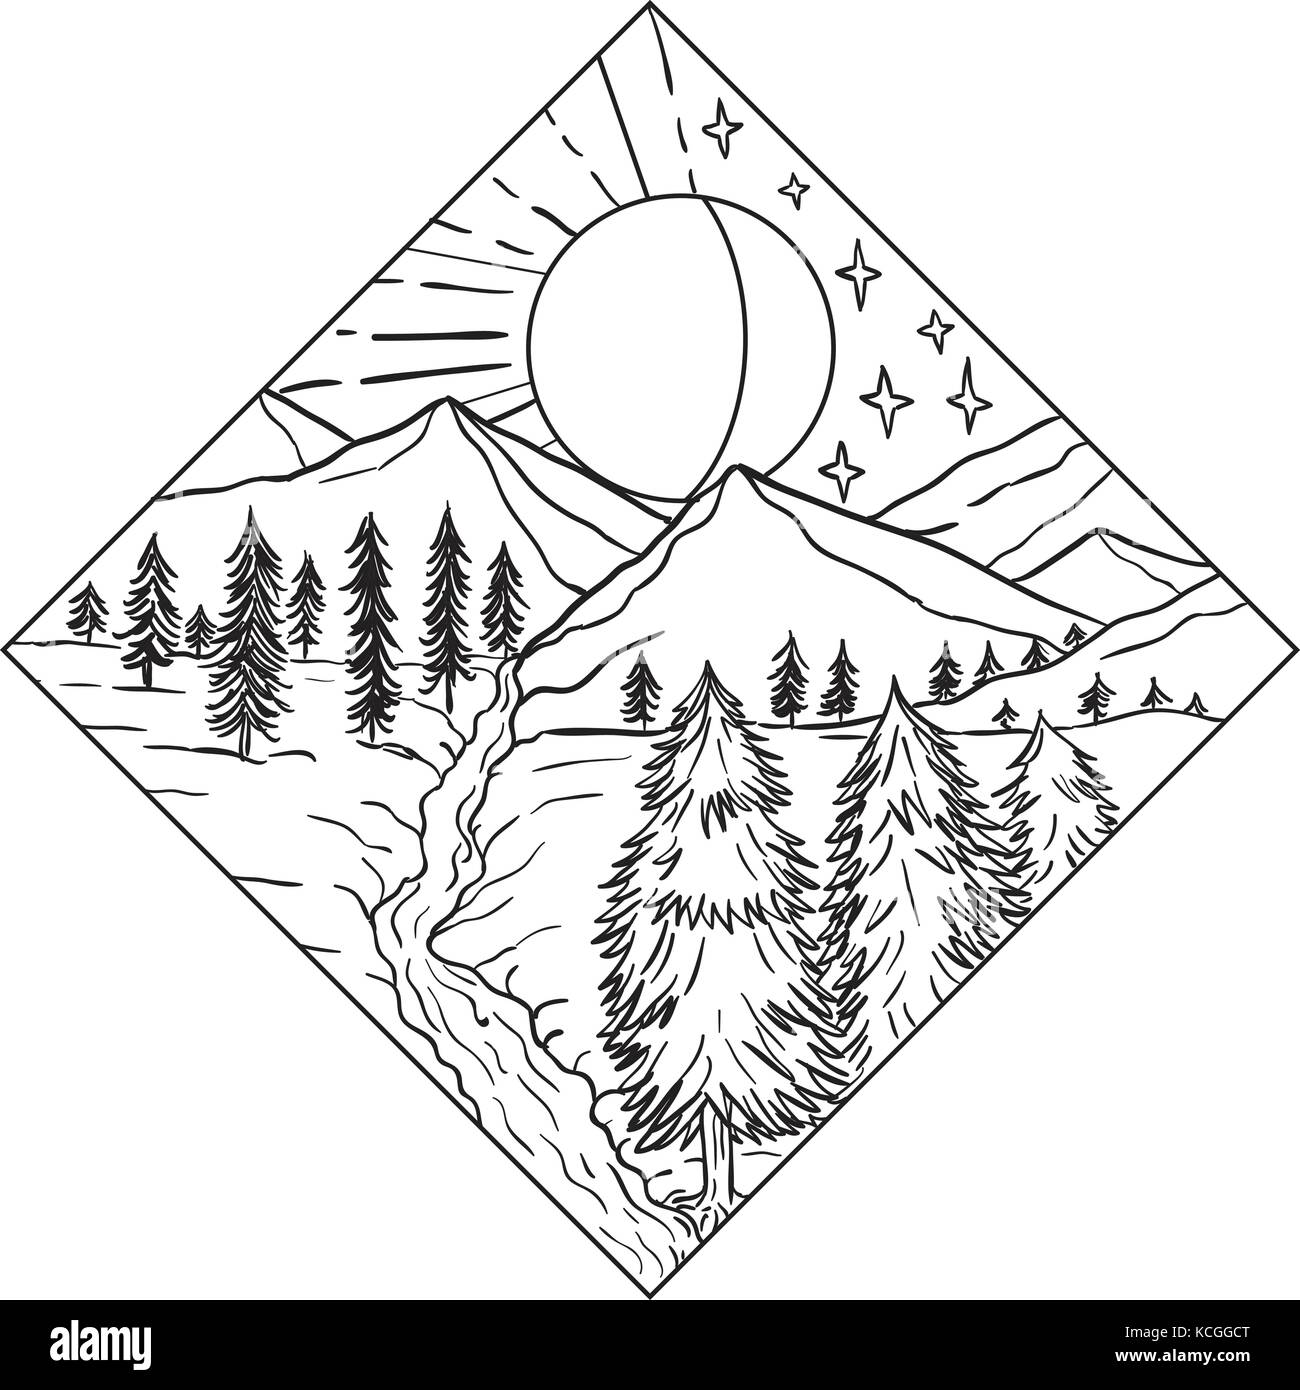 Mono Line Illustration Of Night And Day Sun And Moon Stars With Mountain River And Trees Set Inside Diamond Shape On Isolated Background Done In Black Stock Vector Image Art